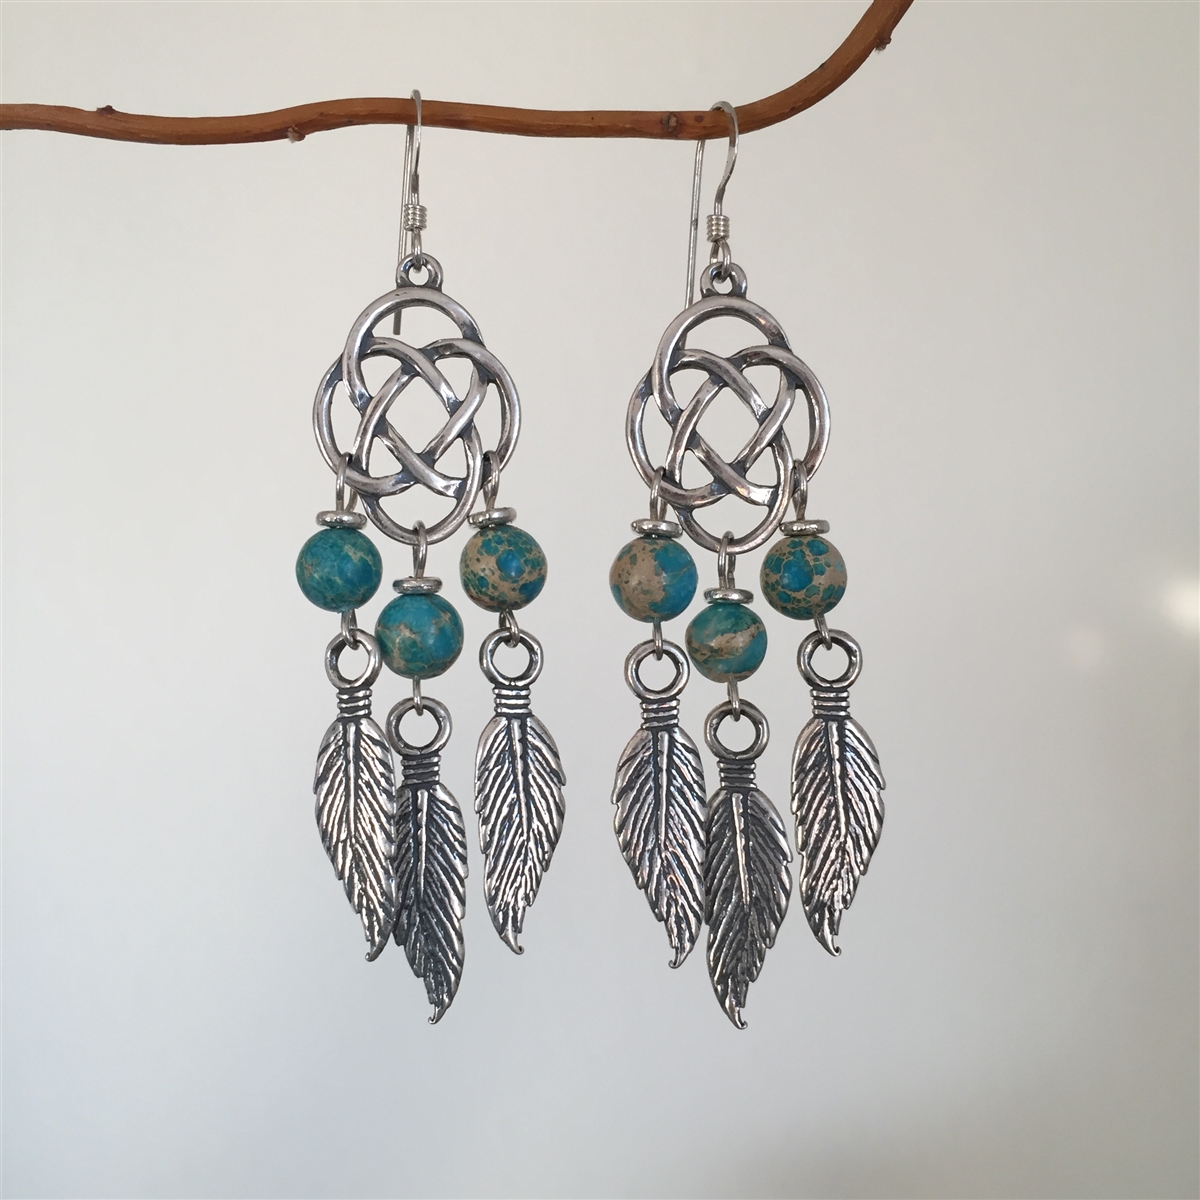 Vintage Dreamcatcher Earrings Sterling Silver Feather Turquoise BeadRage